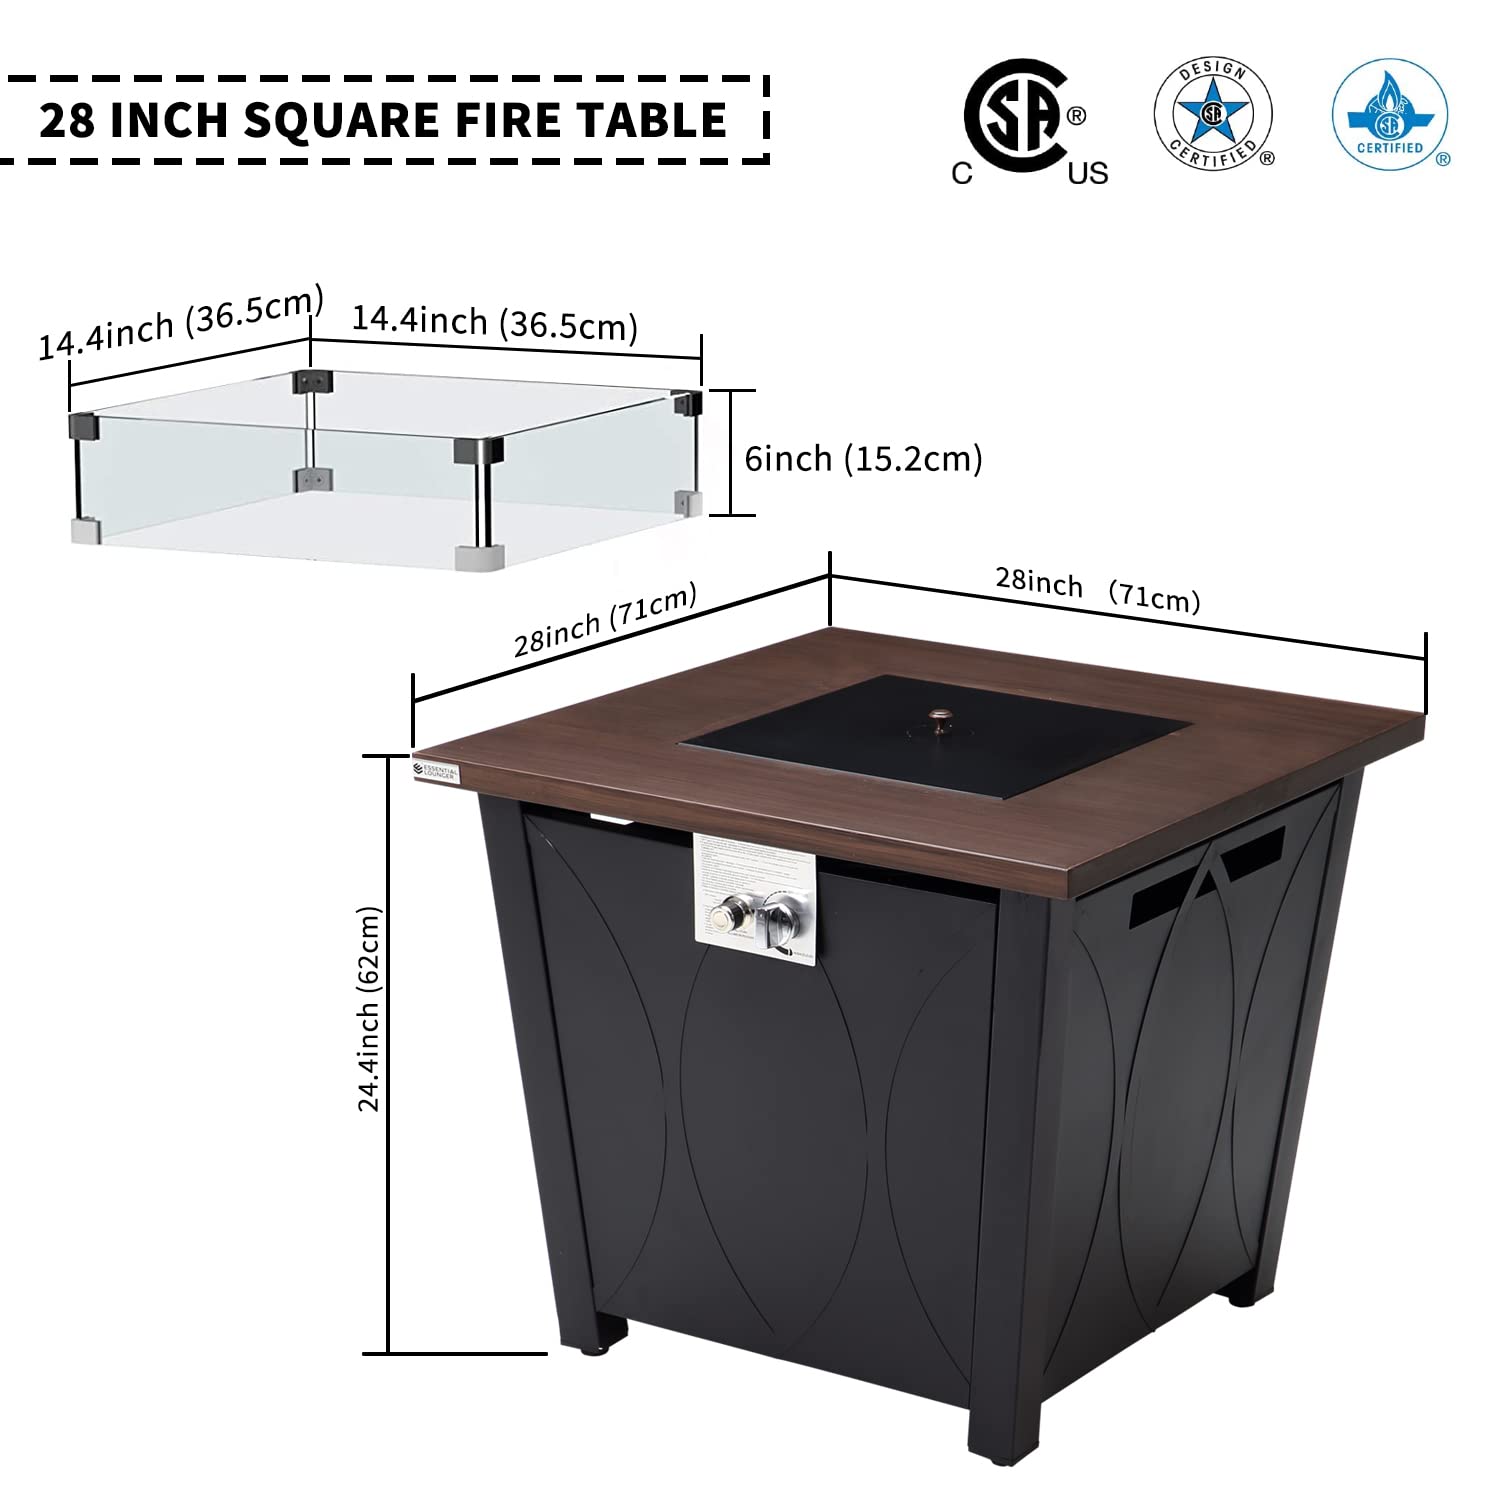 Essential Lounger 28 Inch Fire Table, 50,000 BTU Square Outdoor Fire Pit Tables Gas Fire Pit with Lid, Glass Wind Guard,Waterproof Storage Cover,Lava Rocks, Outdoor Fireplace Propane Fire Pit Table